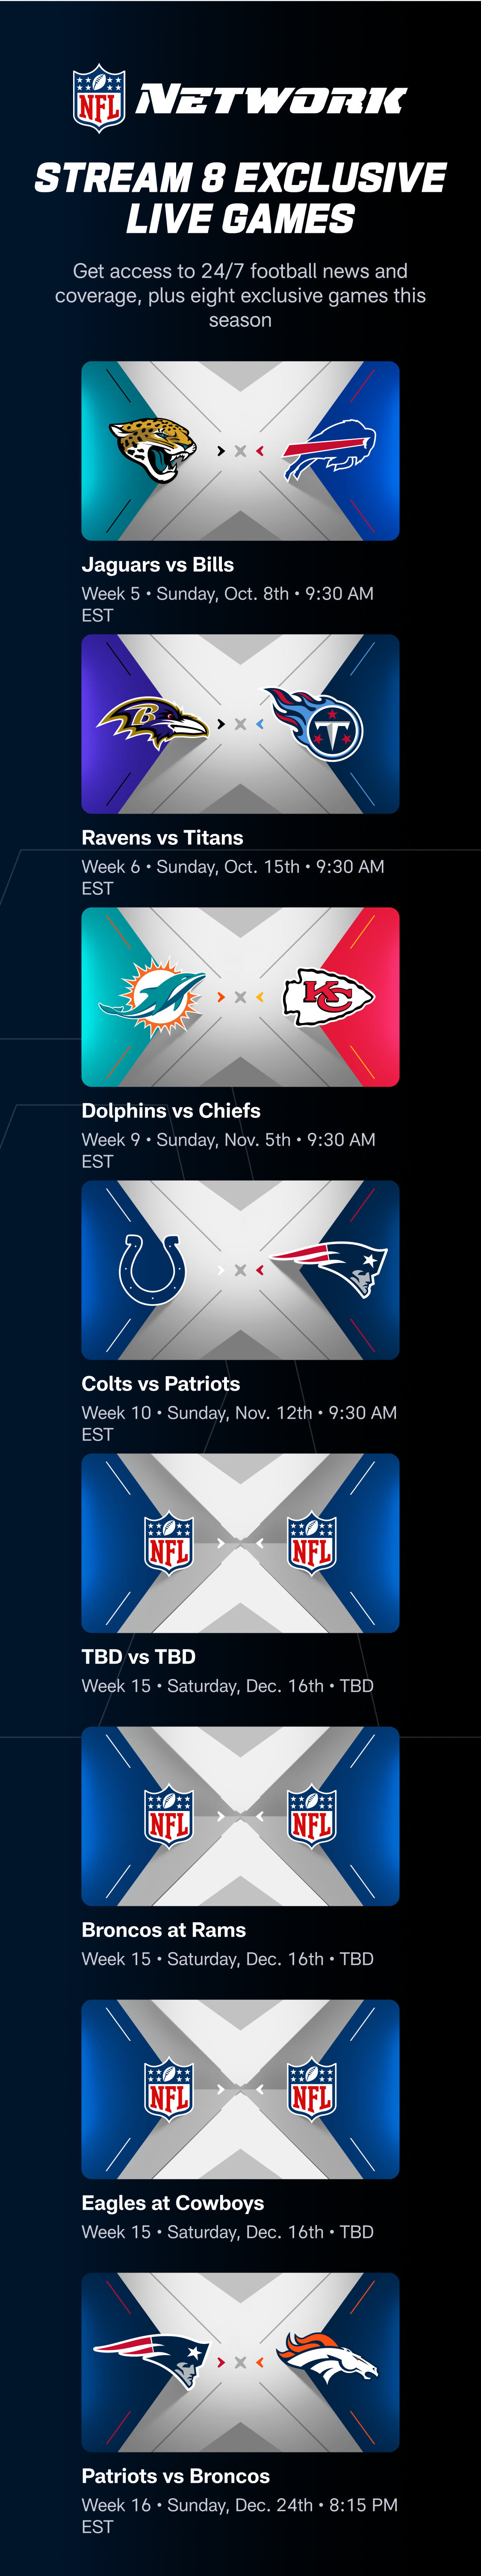 give me all the nfl games today